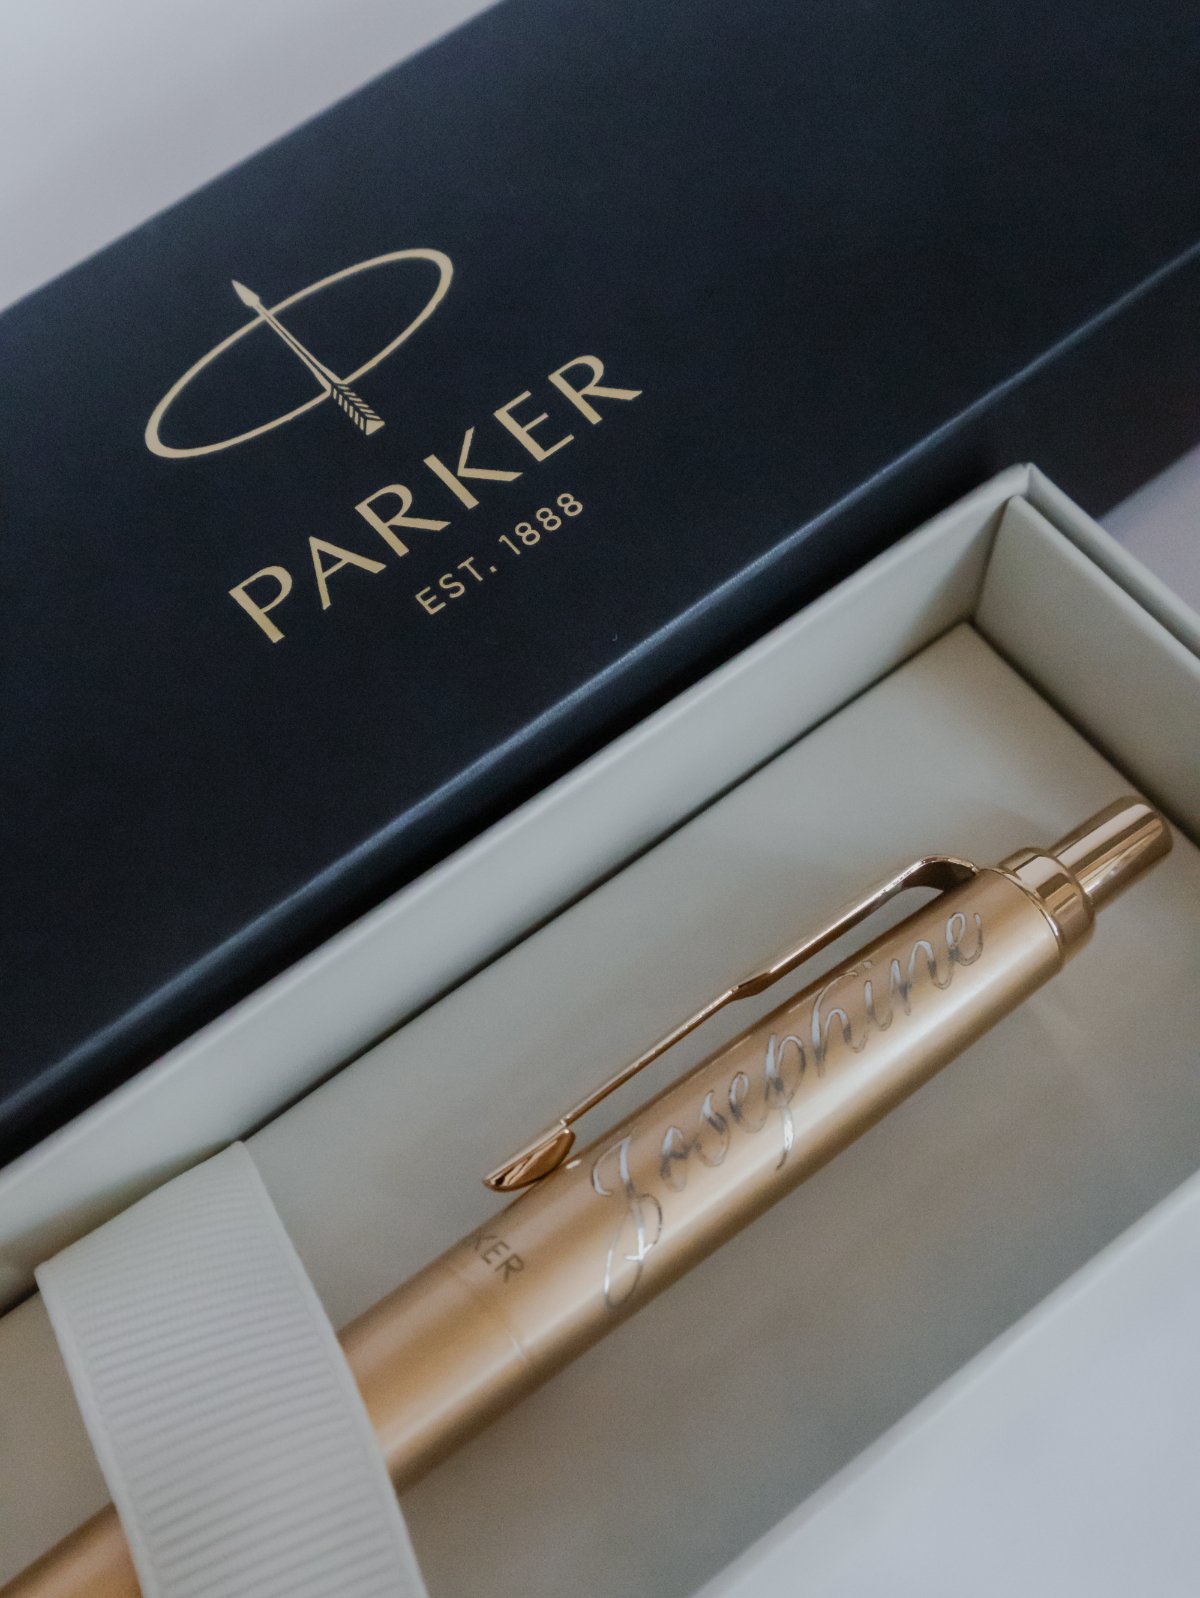 First Name Calligraphy Engraving on Parker Pens for Bloomberg 13.jpg